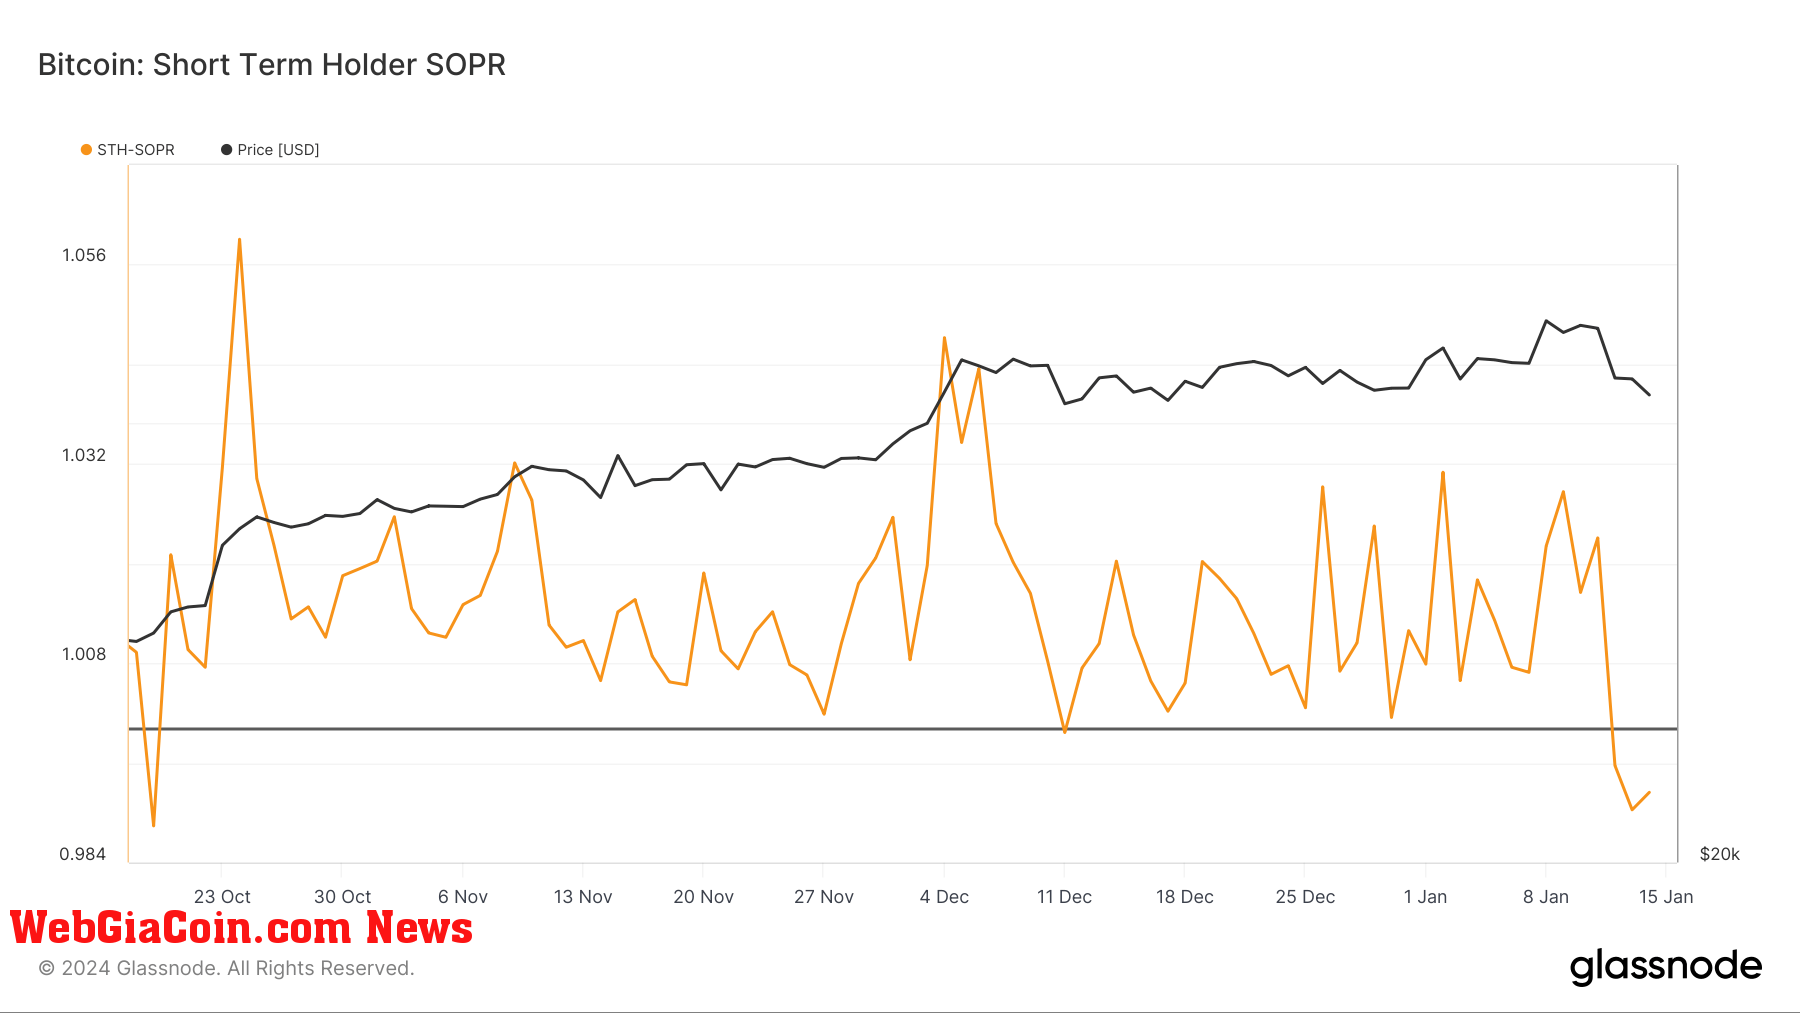 Graph showing the short-term holder SOPR from Oct. 18, 2023 to Jan. 14, 2024 (Source: Glassnode)